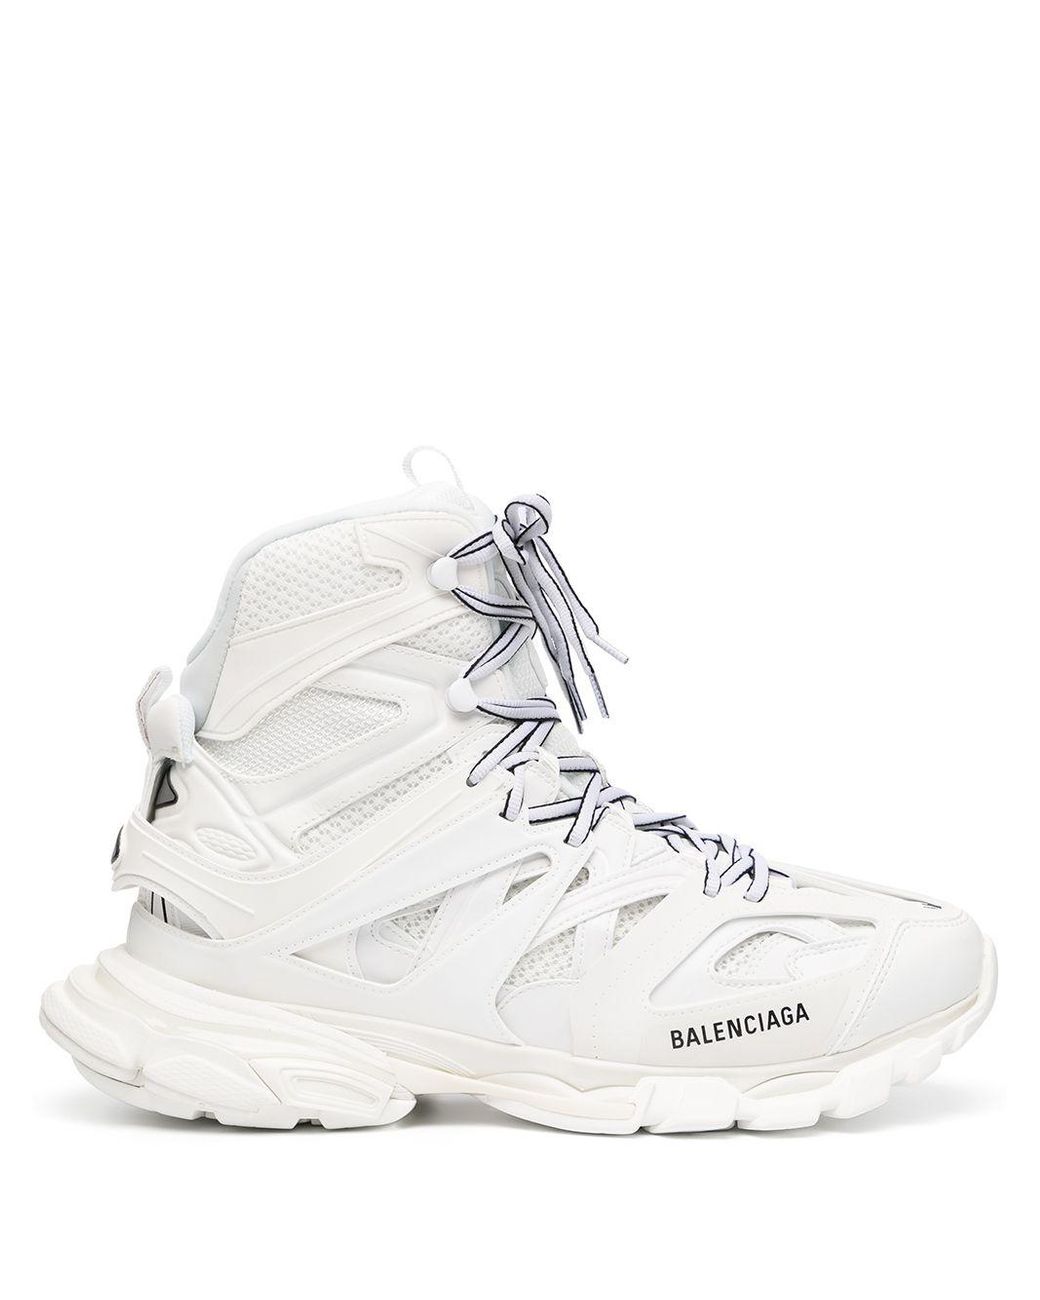 Balenciaga Track Hiking Boots in White for Men - Lyst